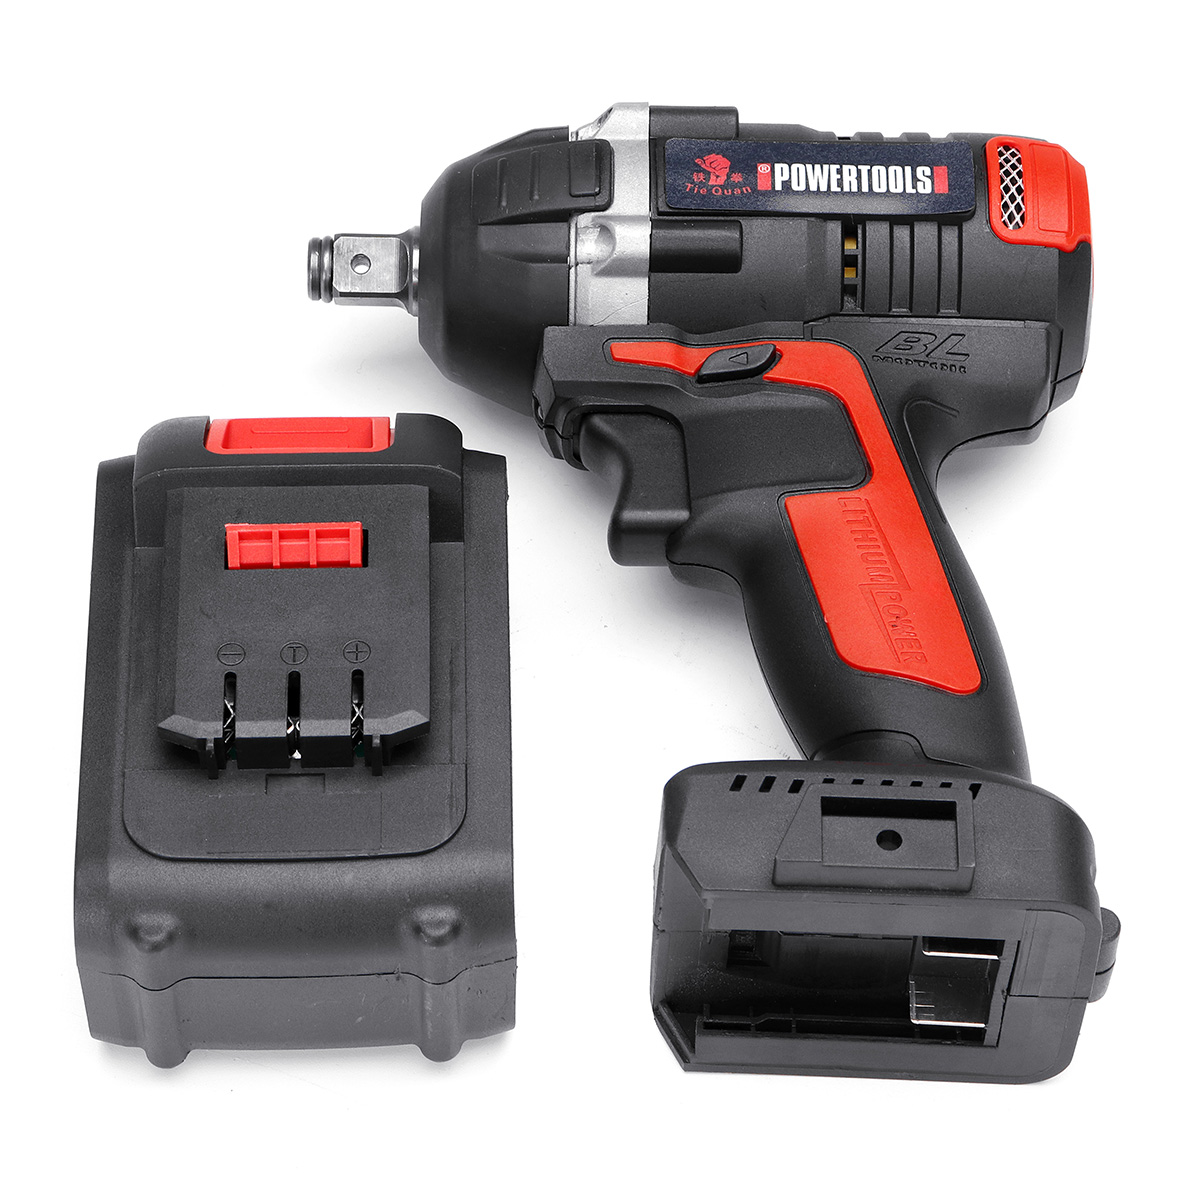 128VF-16000mah-Brushless-Electric-Wrench-Power-Wrench-Tool-330Nm-Cordless-Wrench-Kit-1437430-9